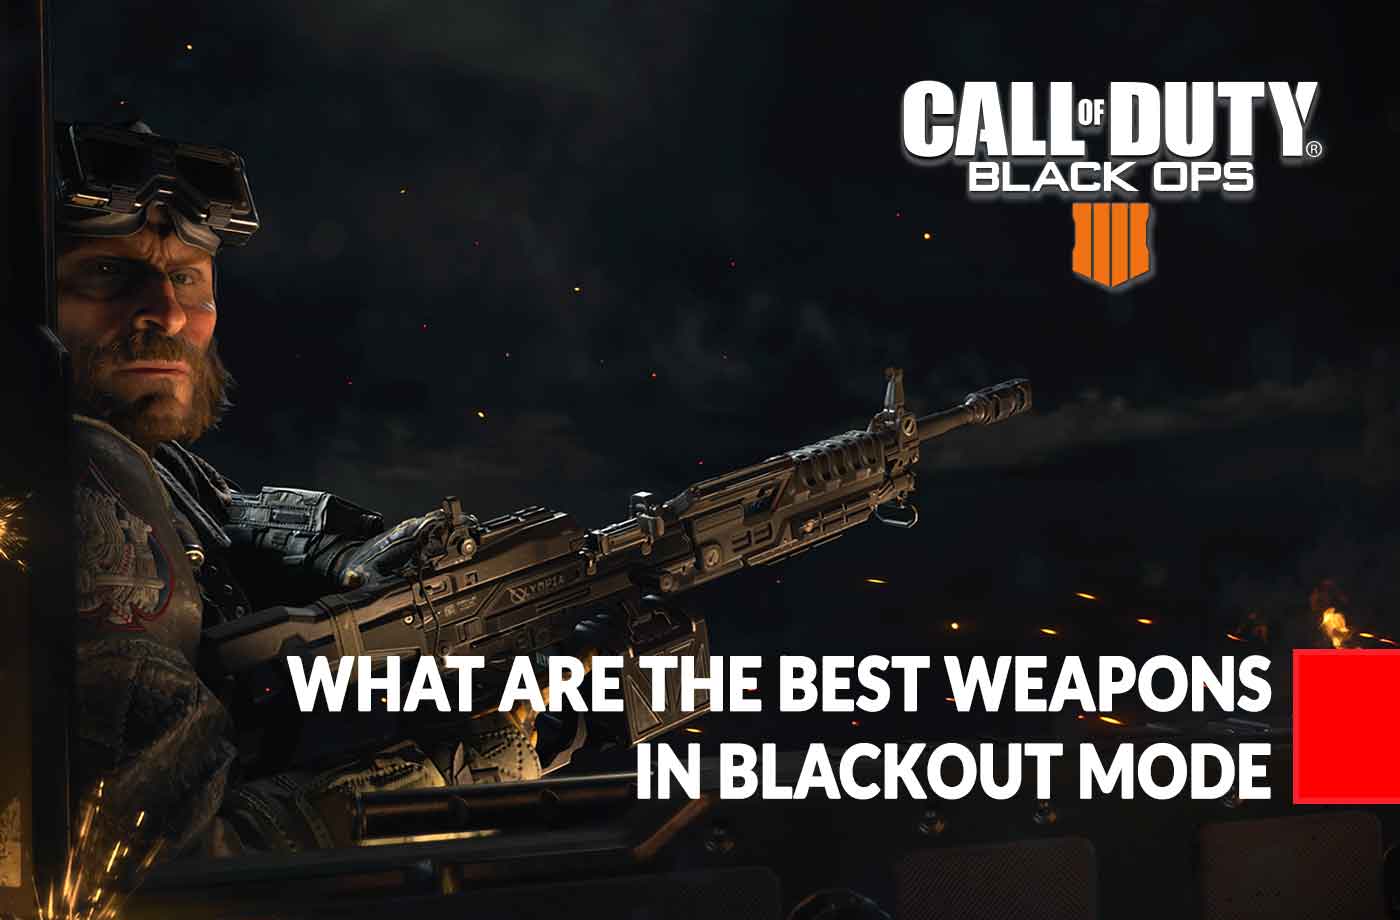 call of duty black ops 4 what are the best weapons in blackout mode - black ops 4 fortnite mode